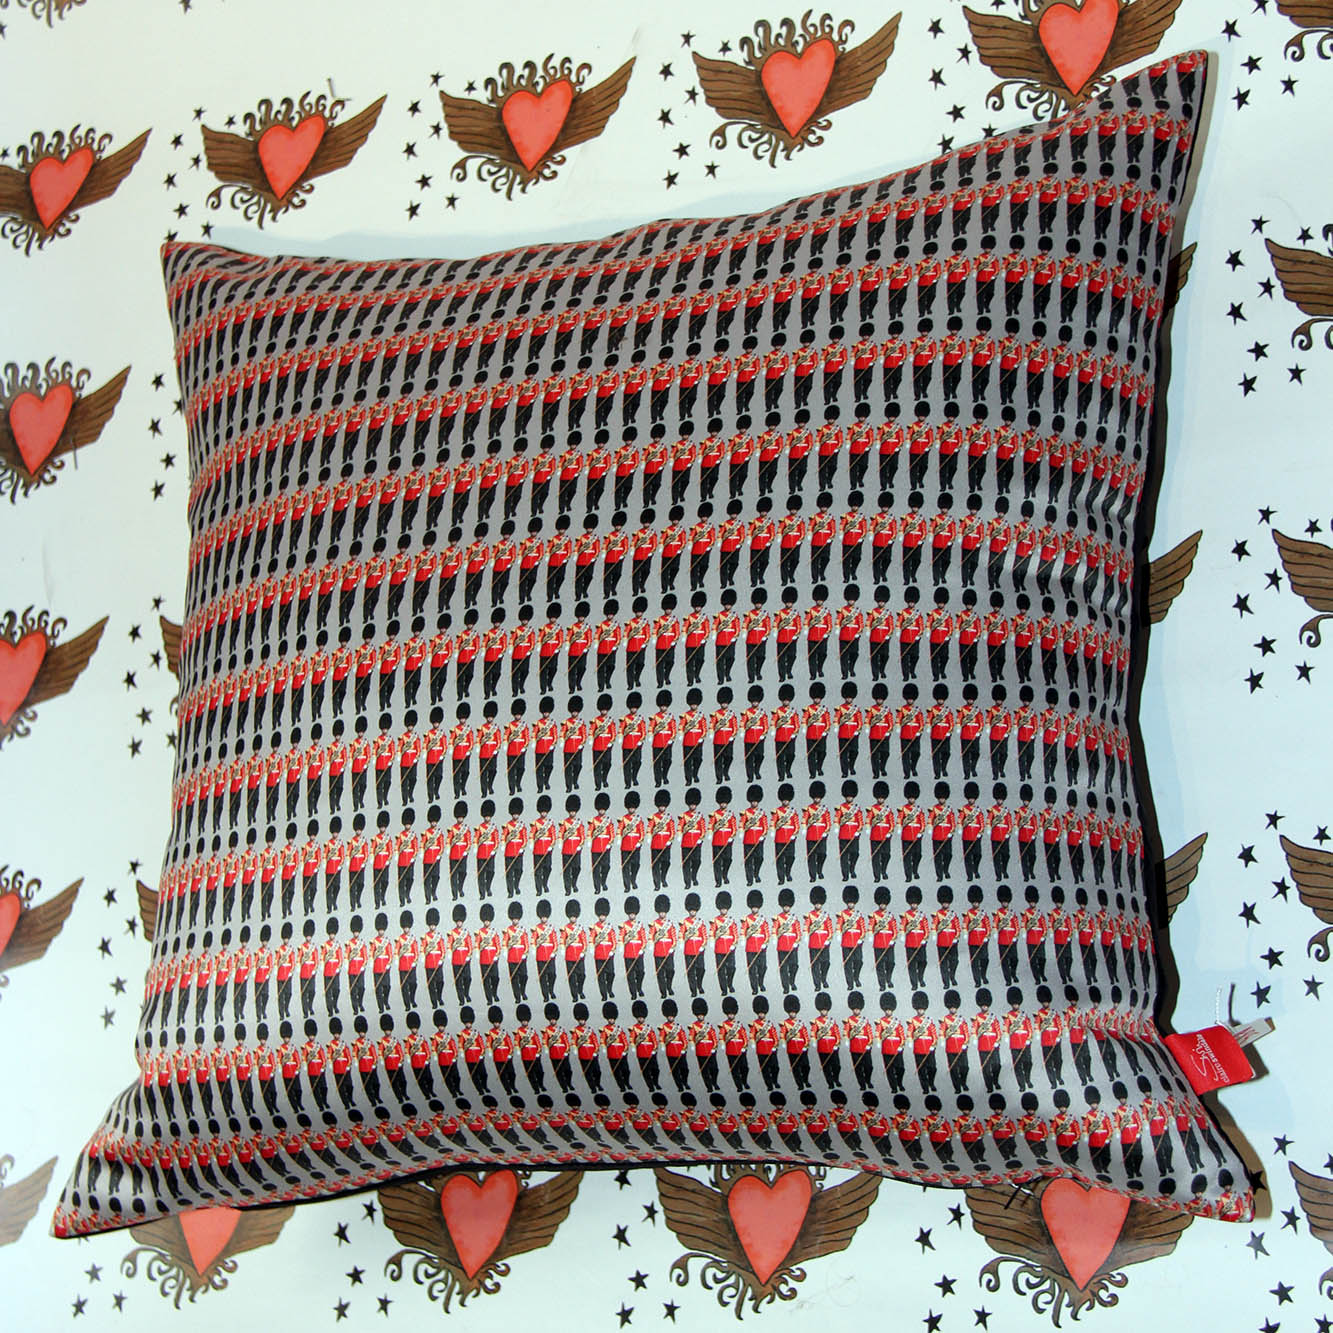 soldier design on cushion, background hearts